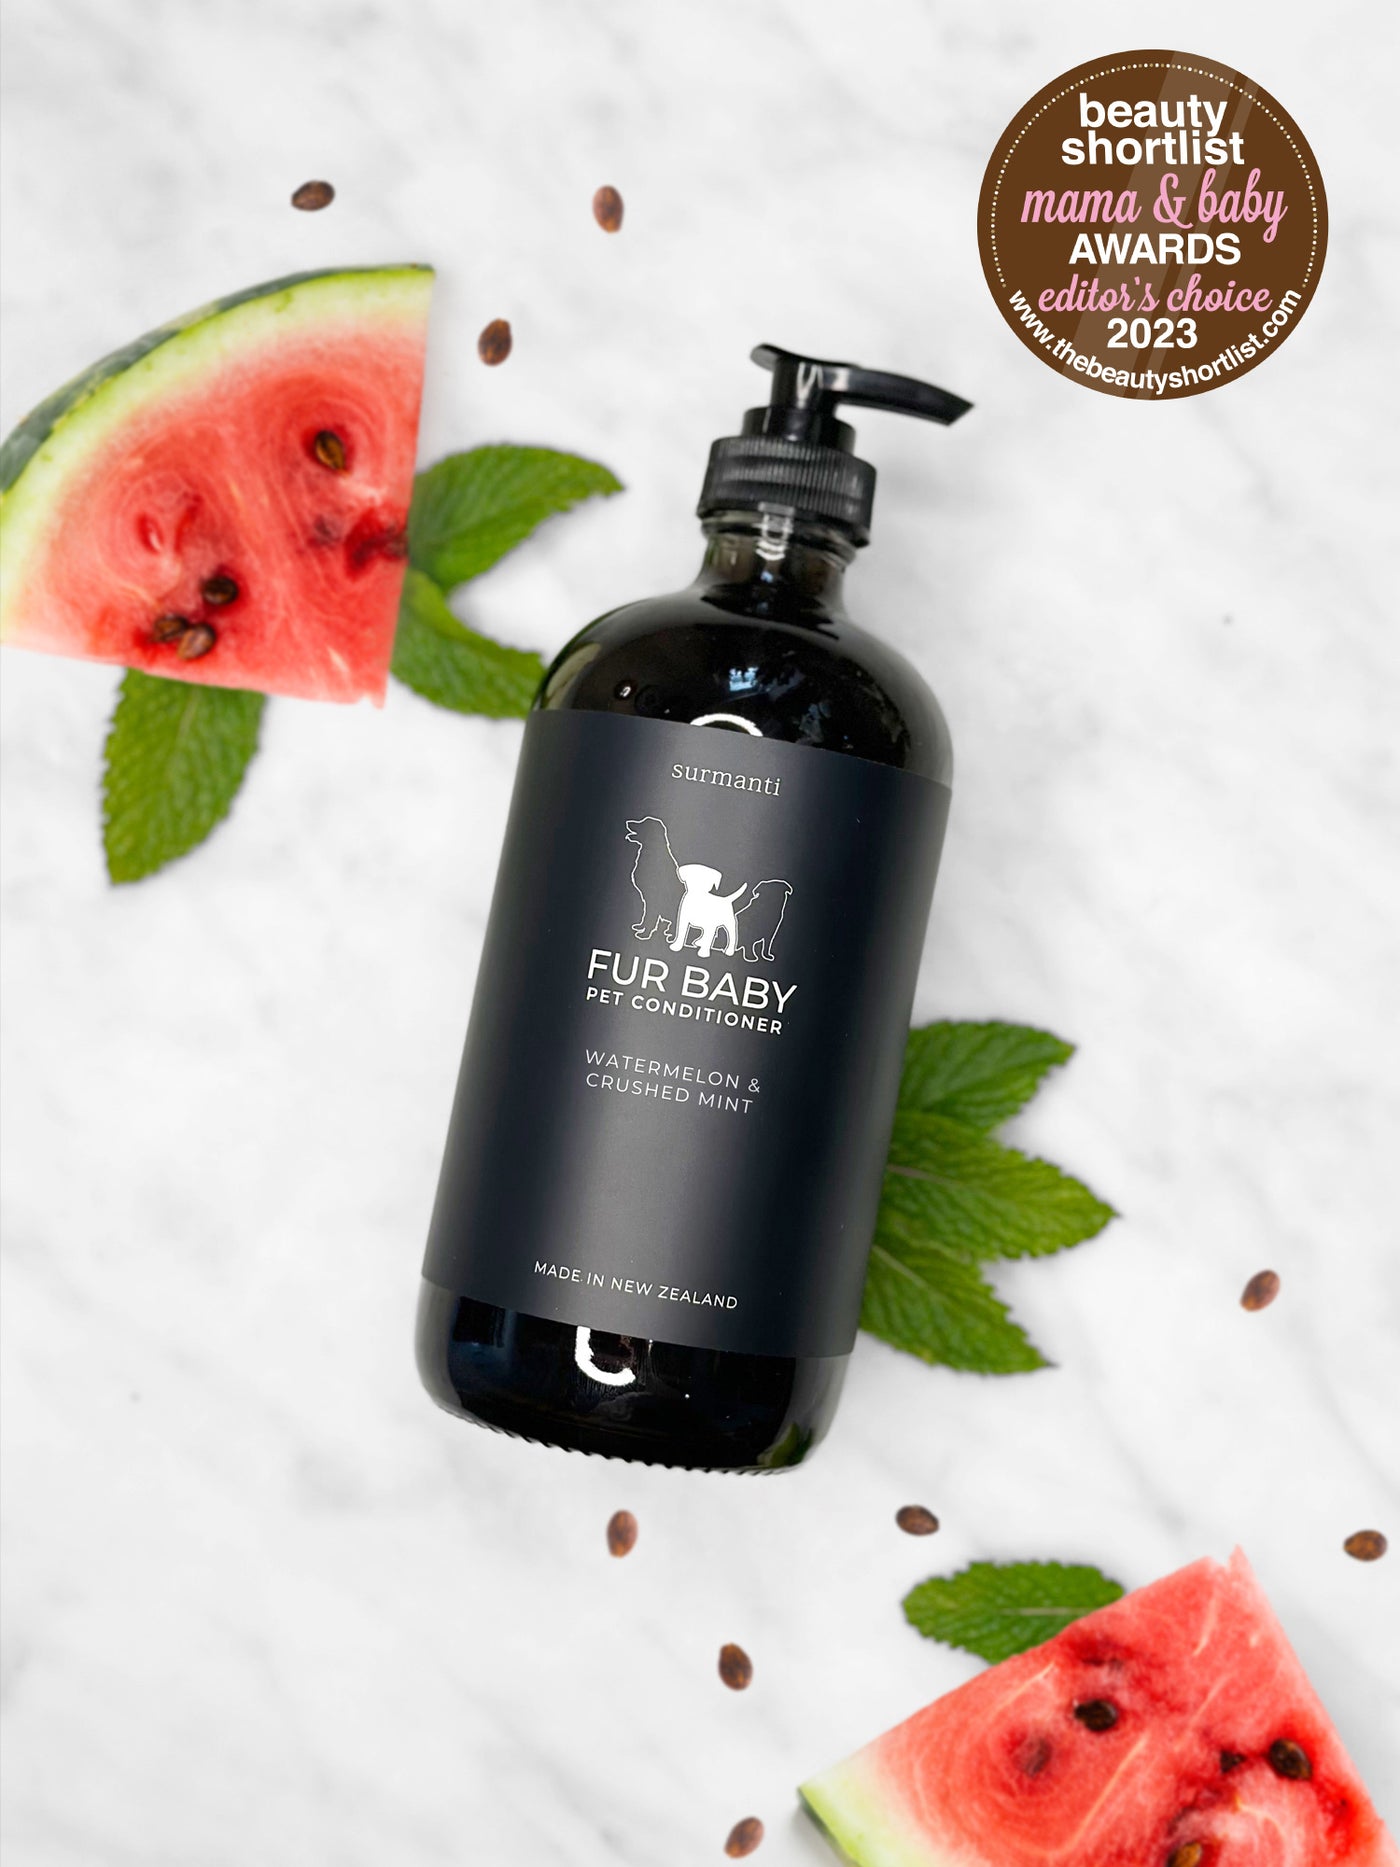 Fur Baby Conditioner - Watermelon & Crushed Mint